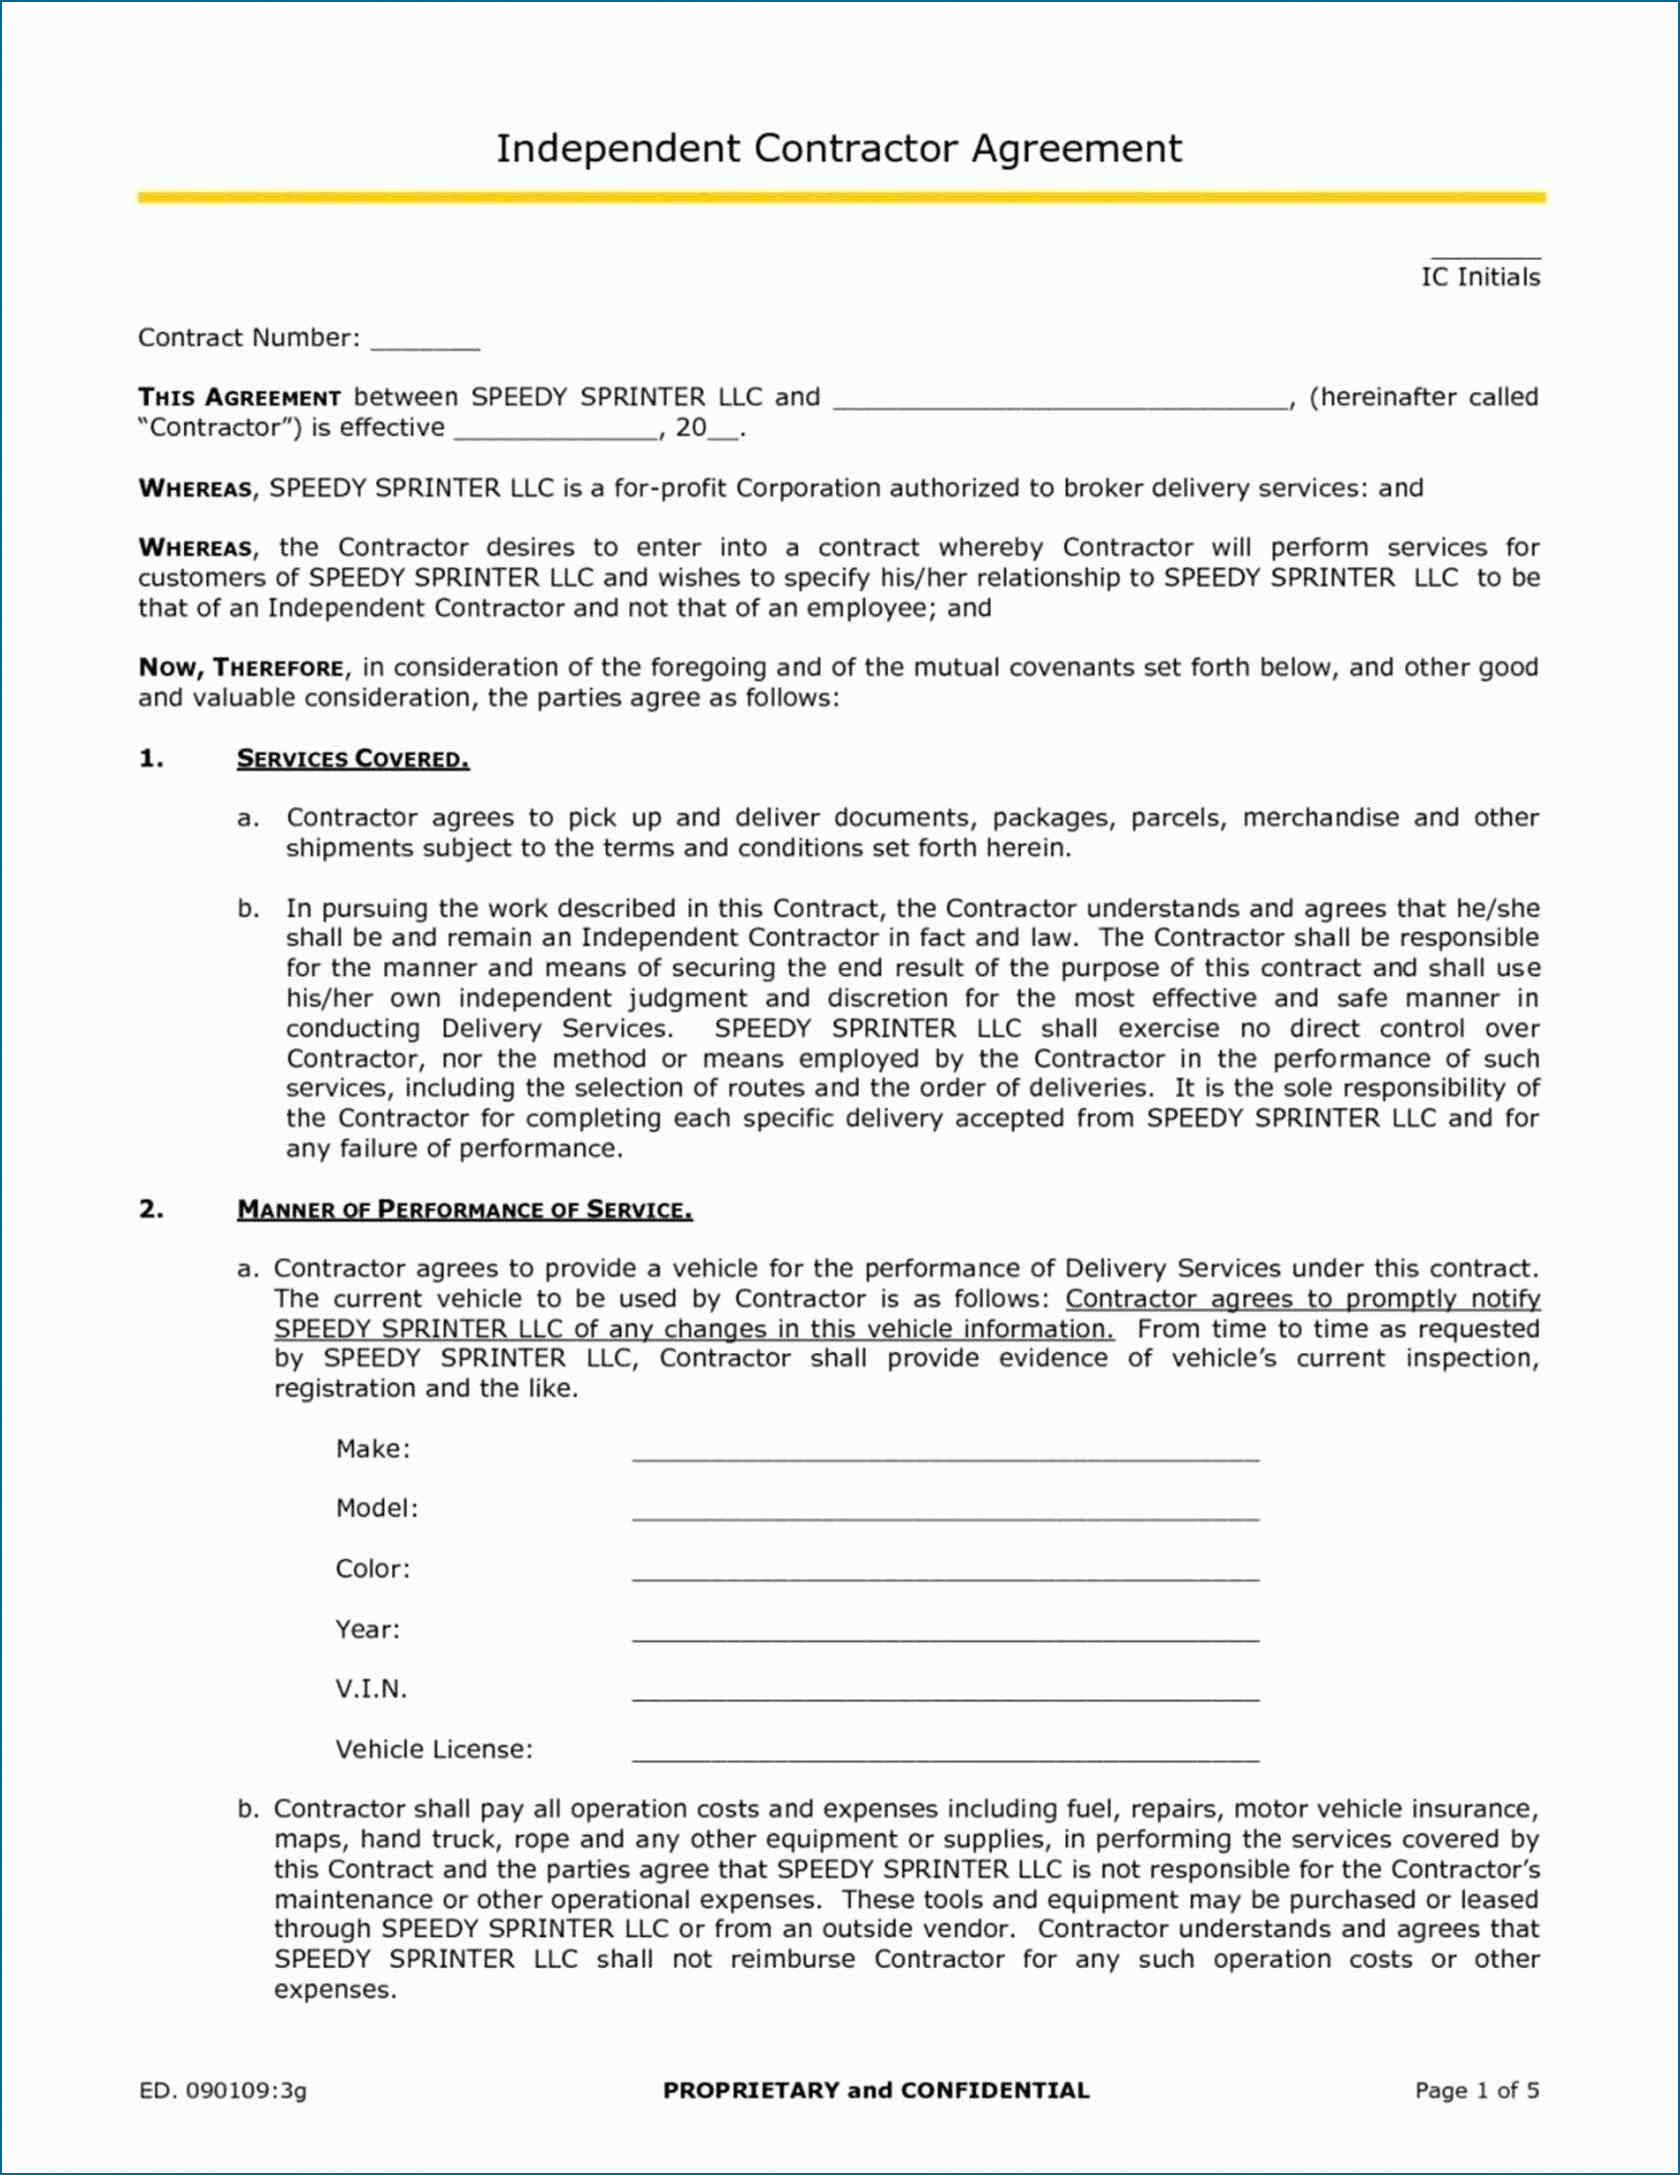 Subcontract Agreement Definition Good Cleaning Service Subcontract Agreement Newbusinesstemplate